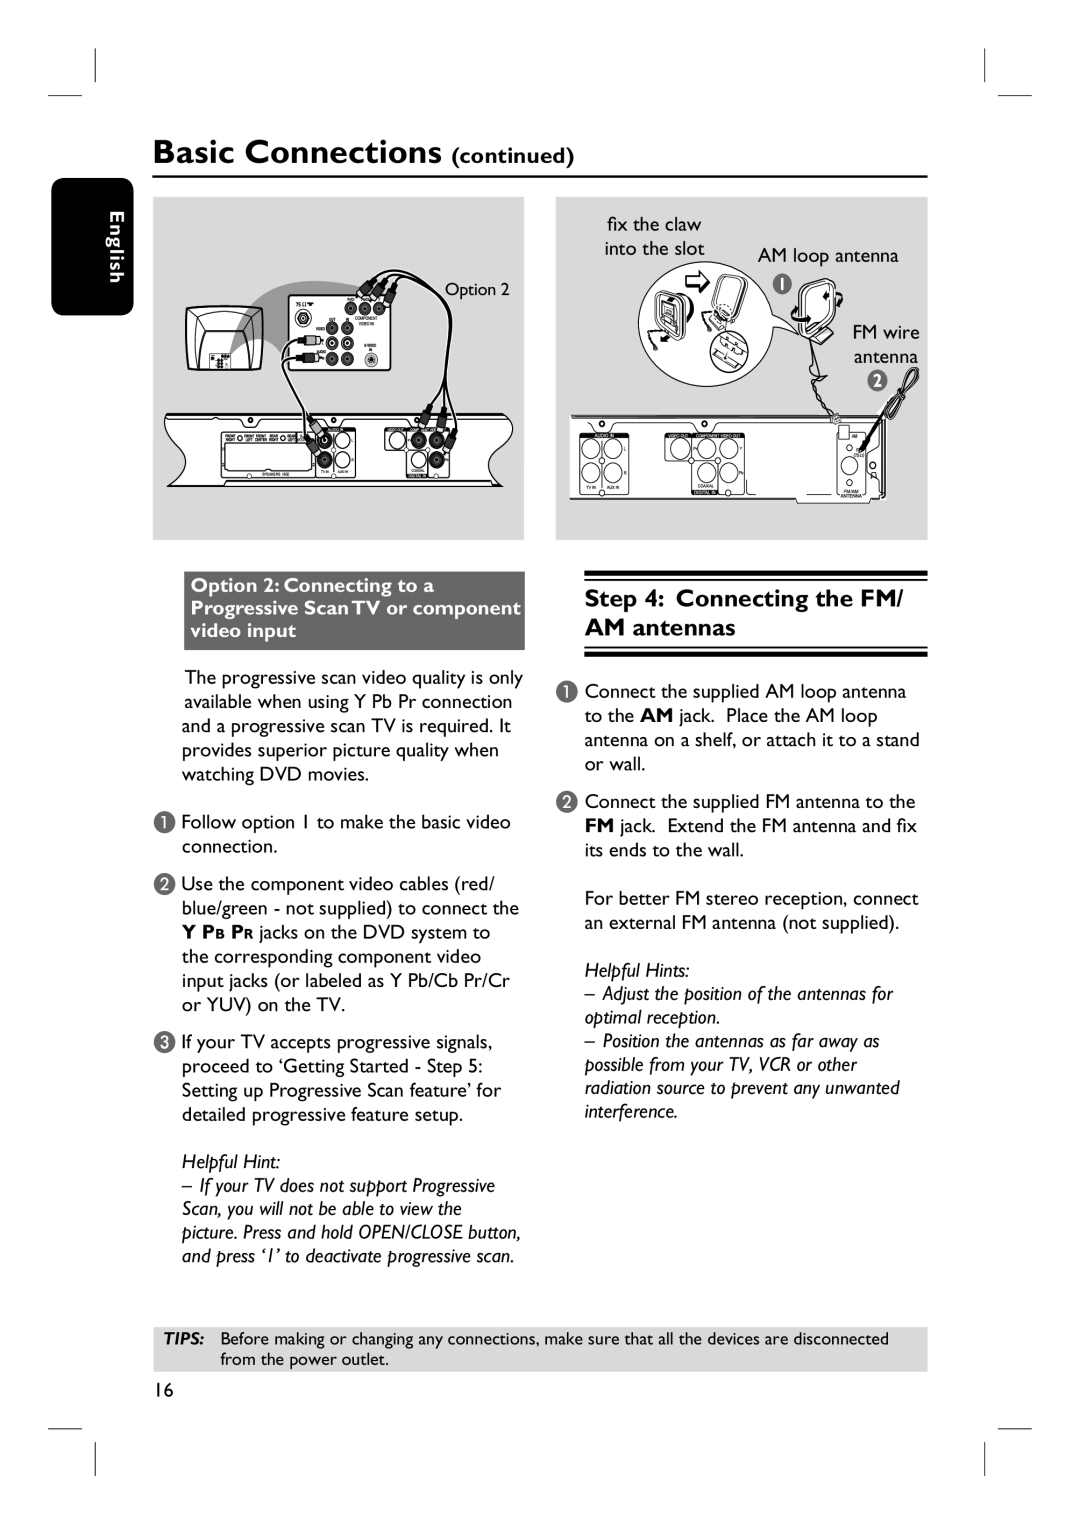 Magnavox MRD100 user manual Connecting the FM/ AM antennas, Basic Connections continued, English, Helpful Hints 